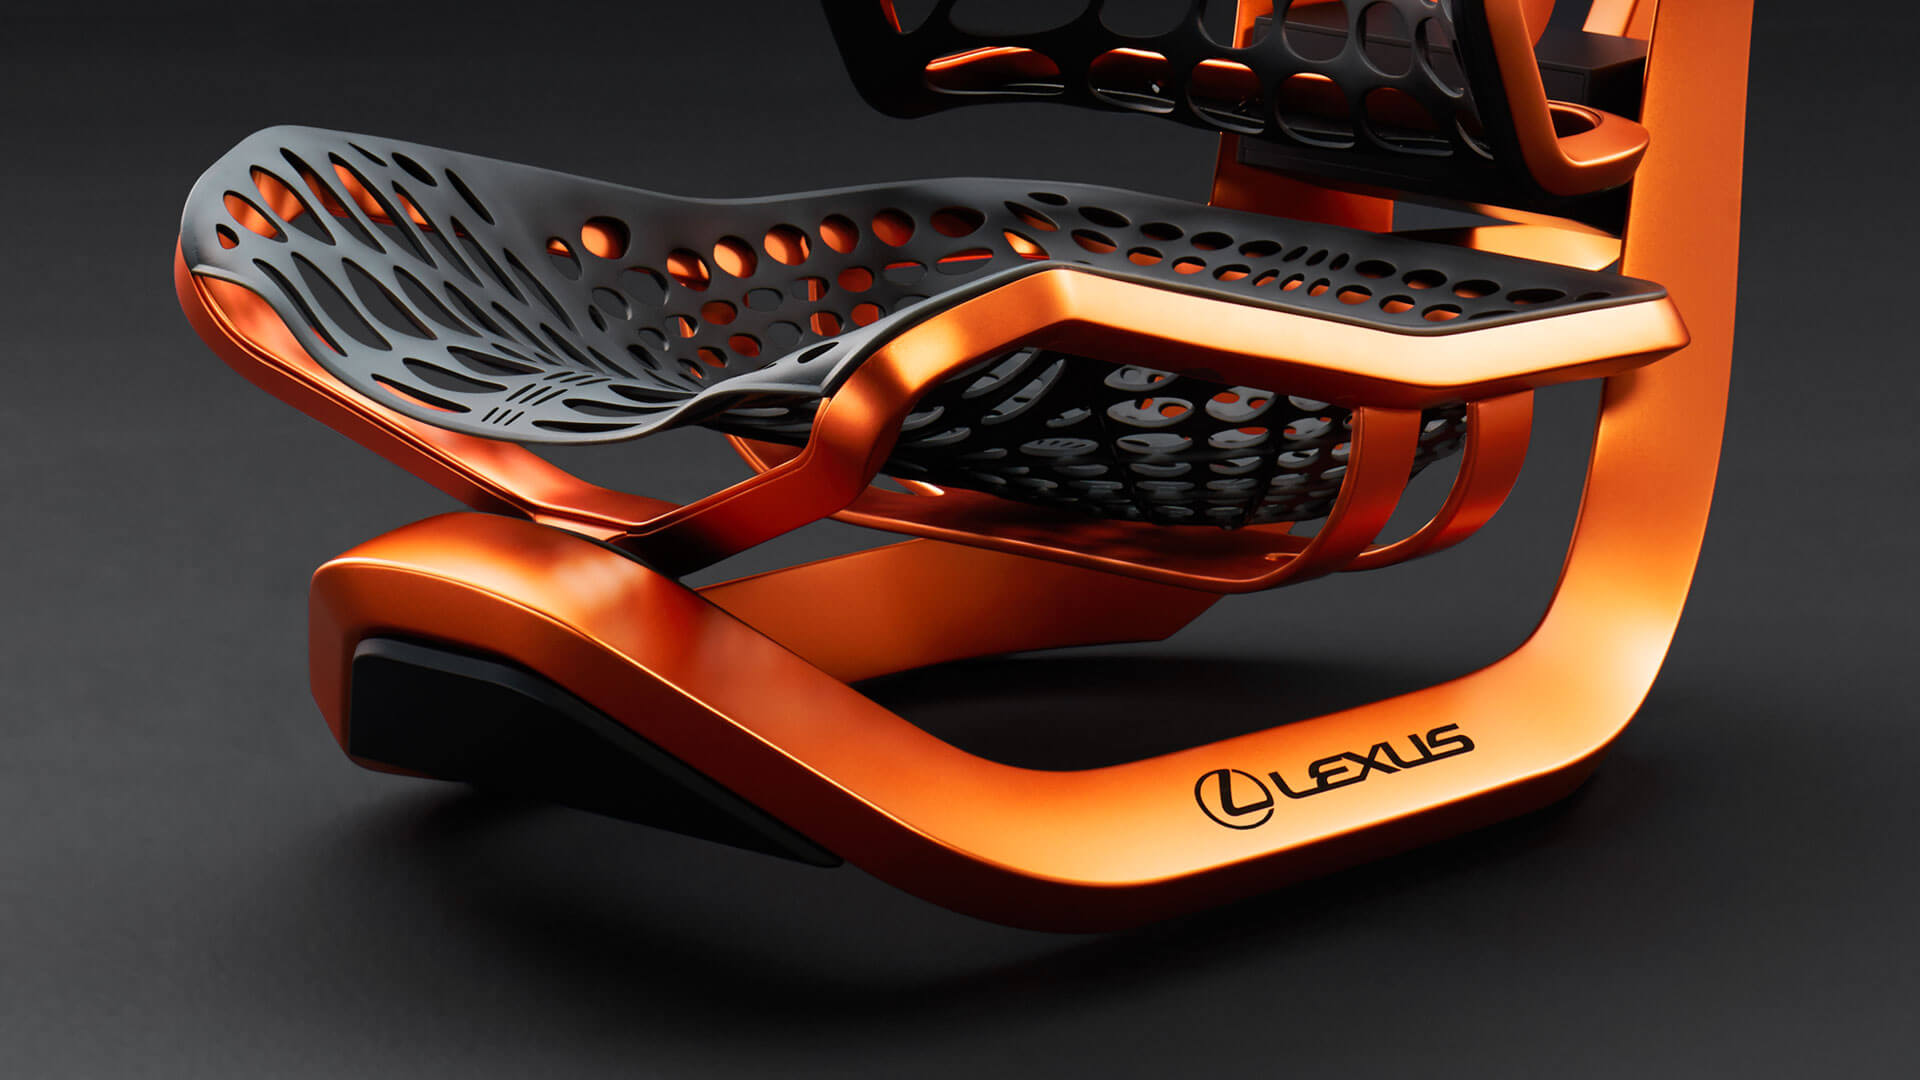 THE KINETIC SEAT CONCEPT